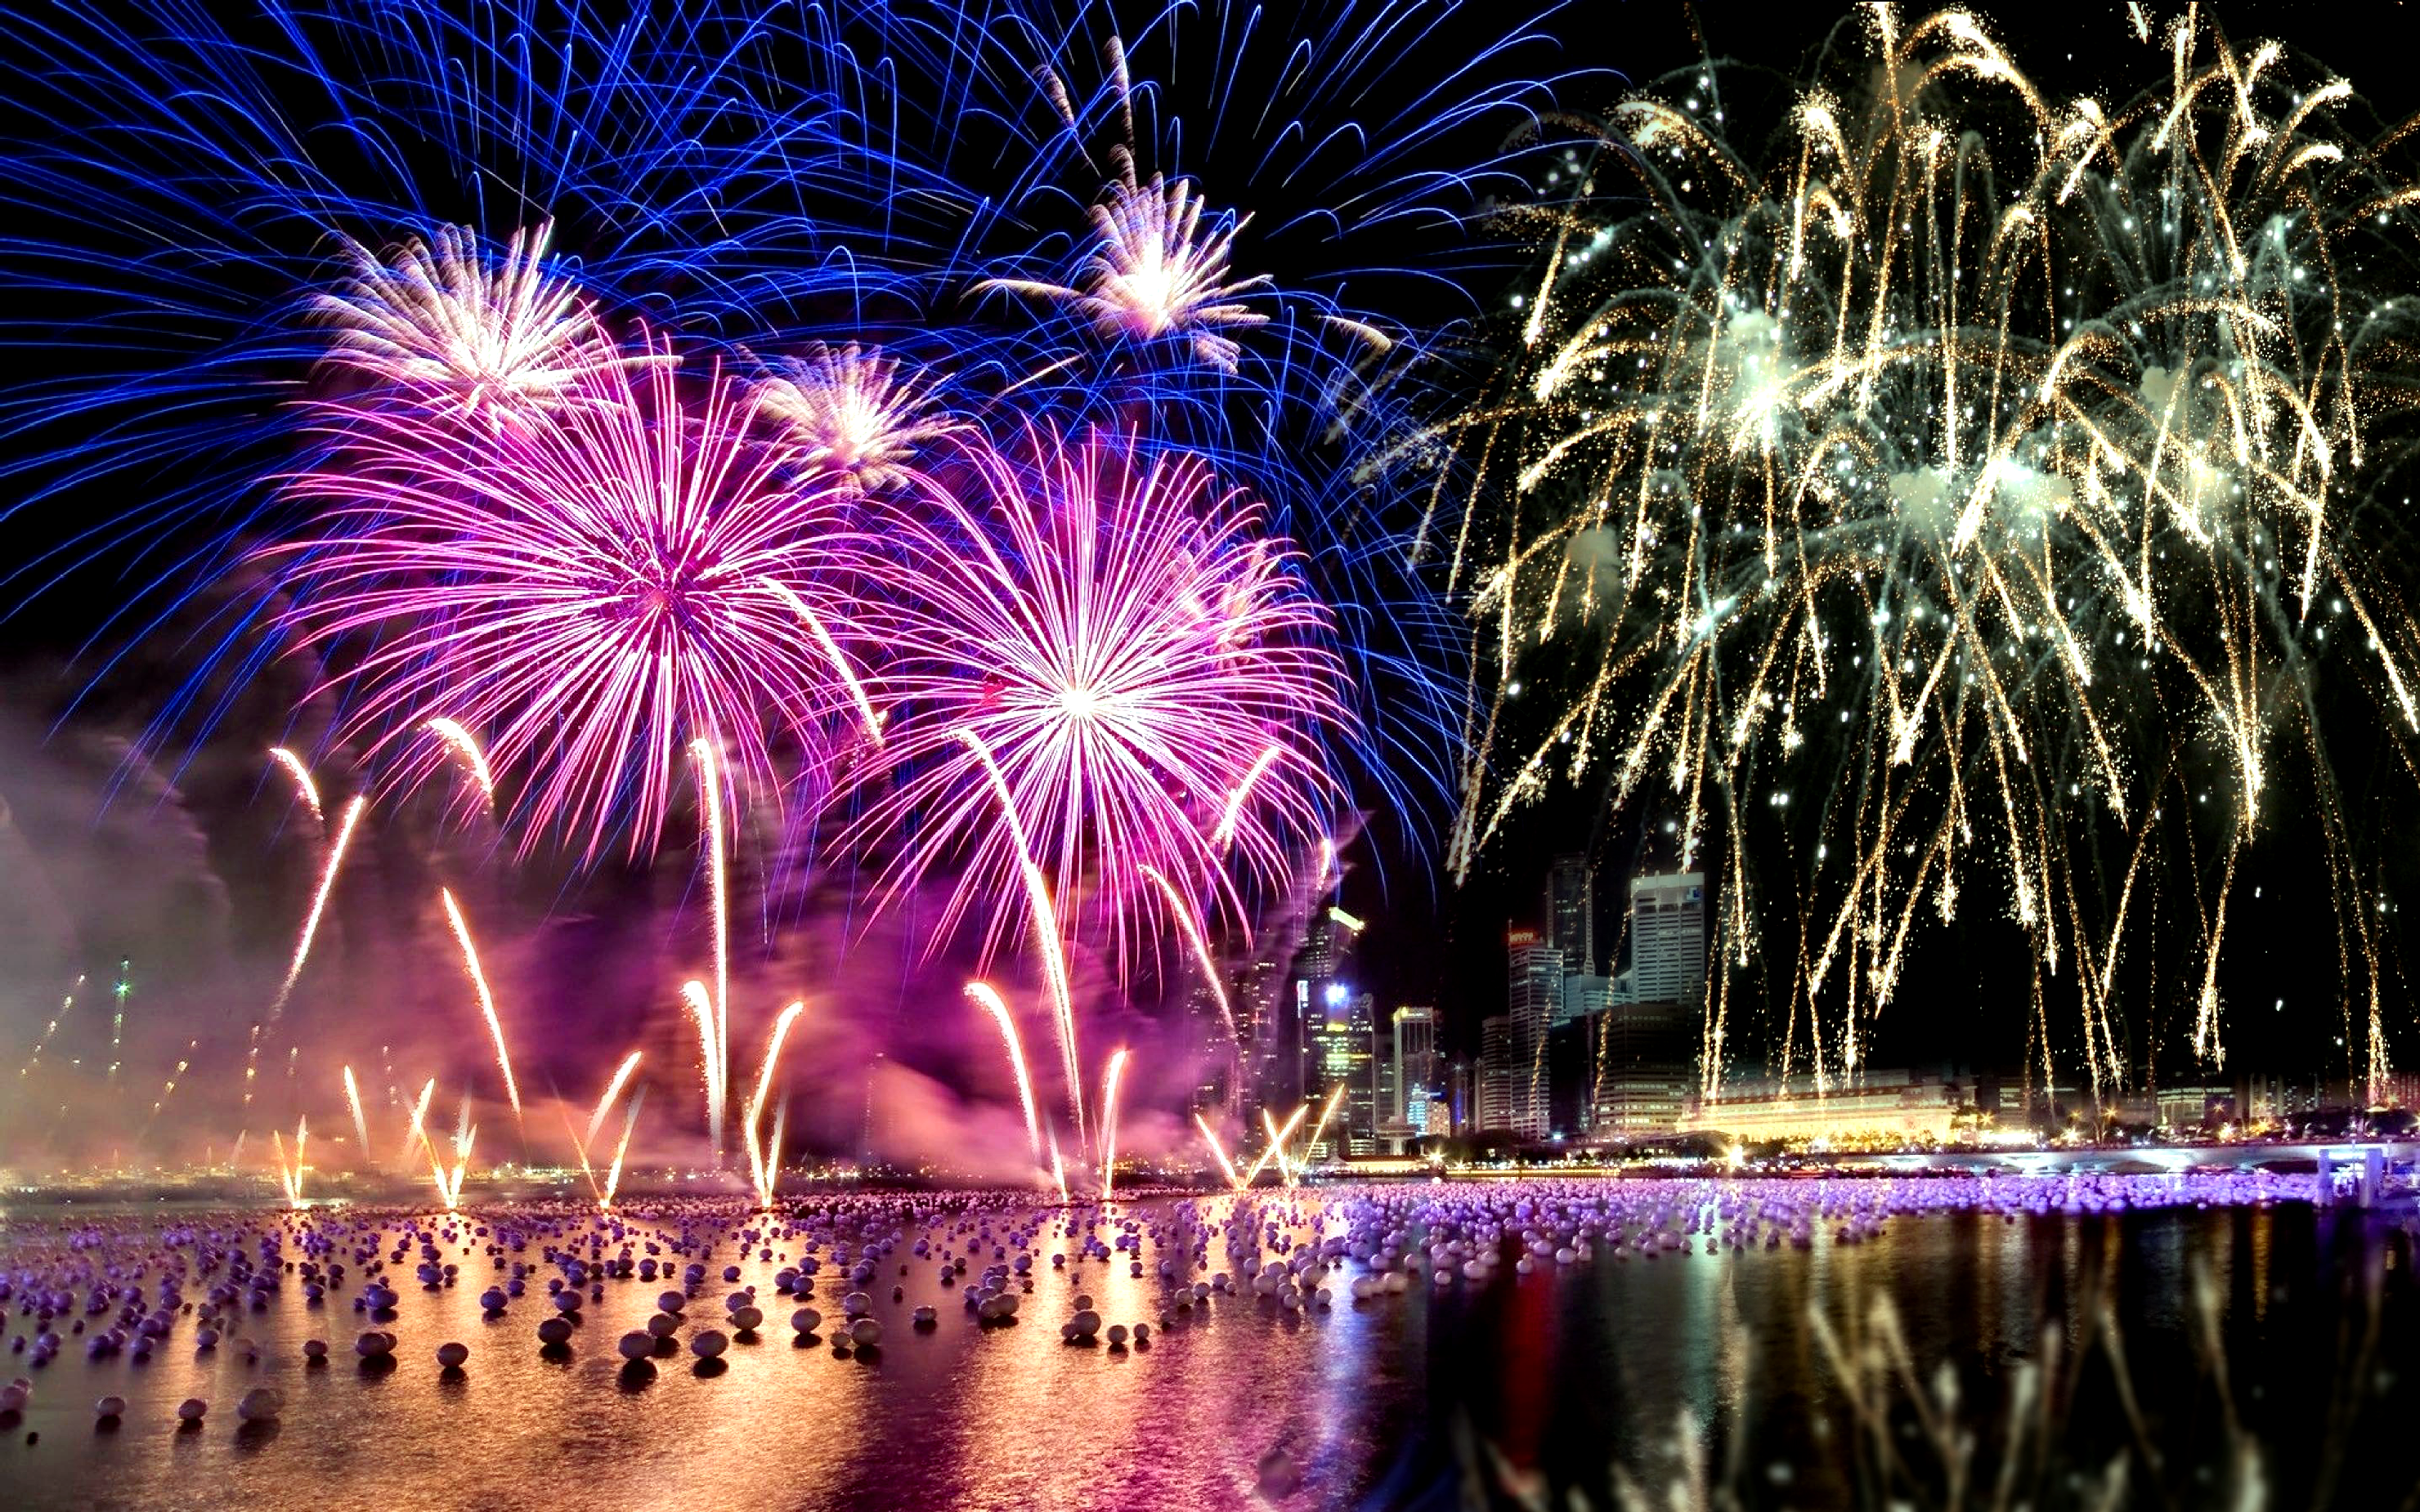 Fireworks HD Wallpaper Search More High Definition 1080p 720p